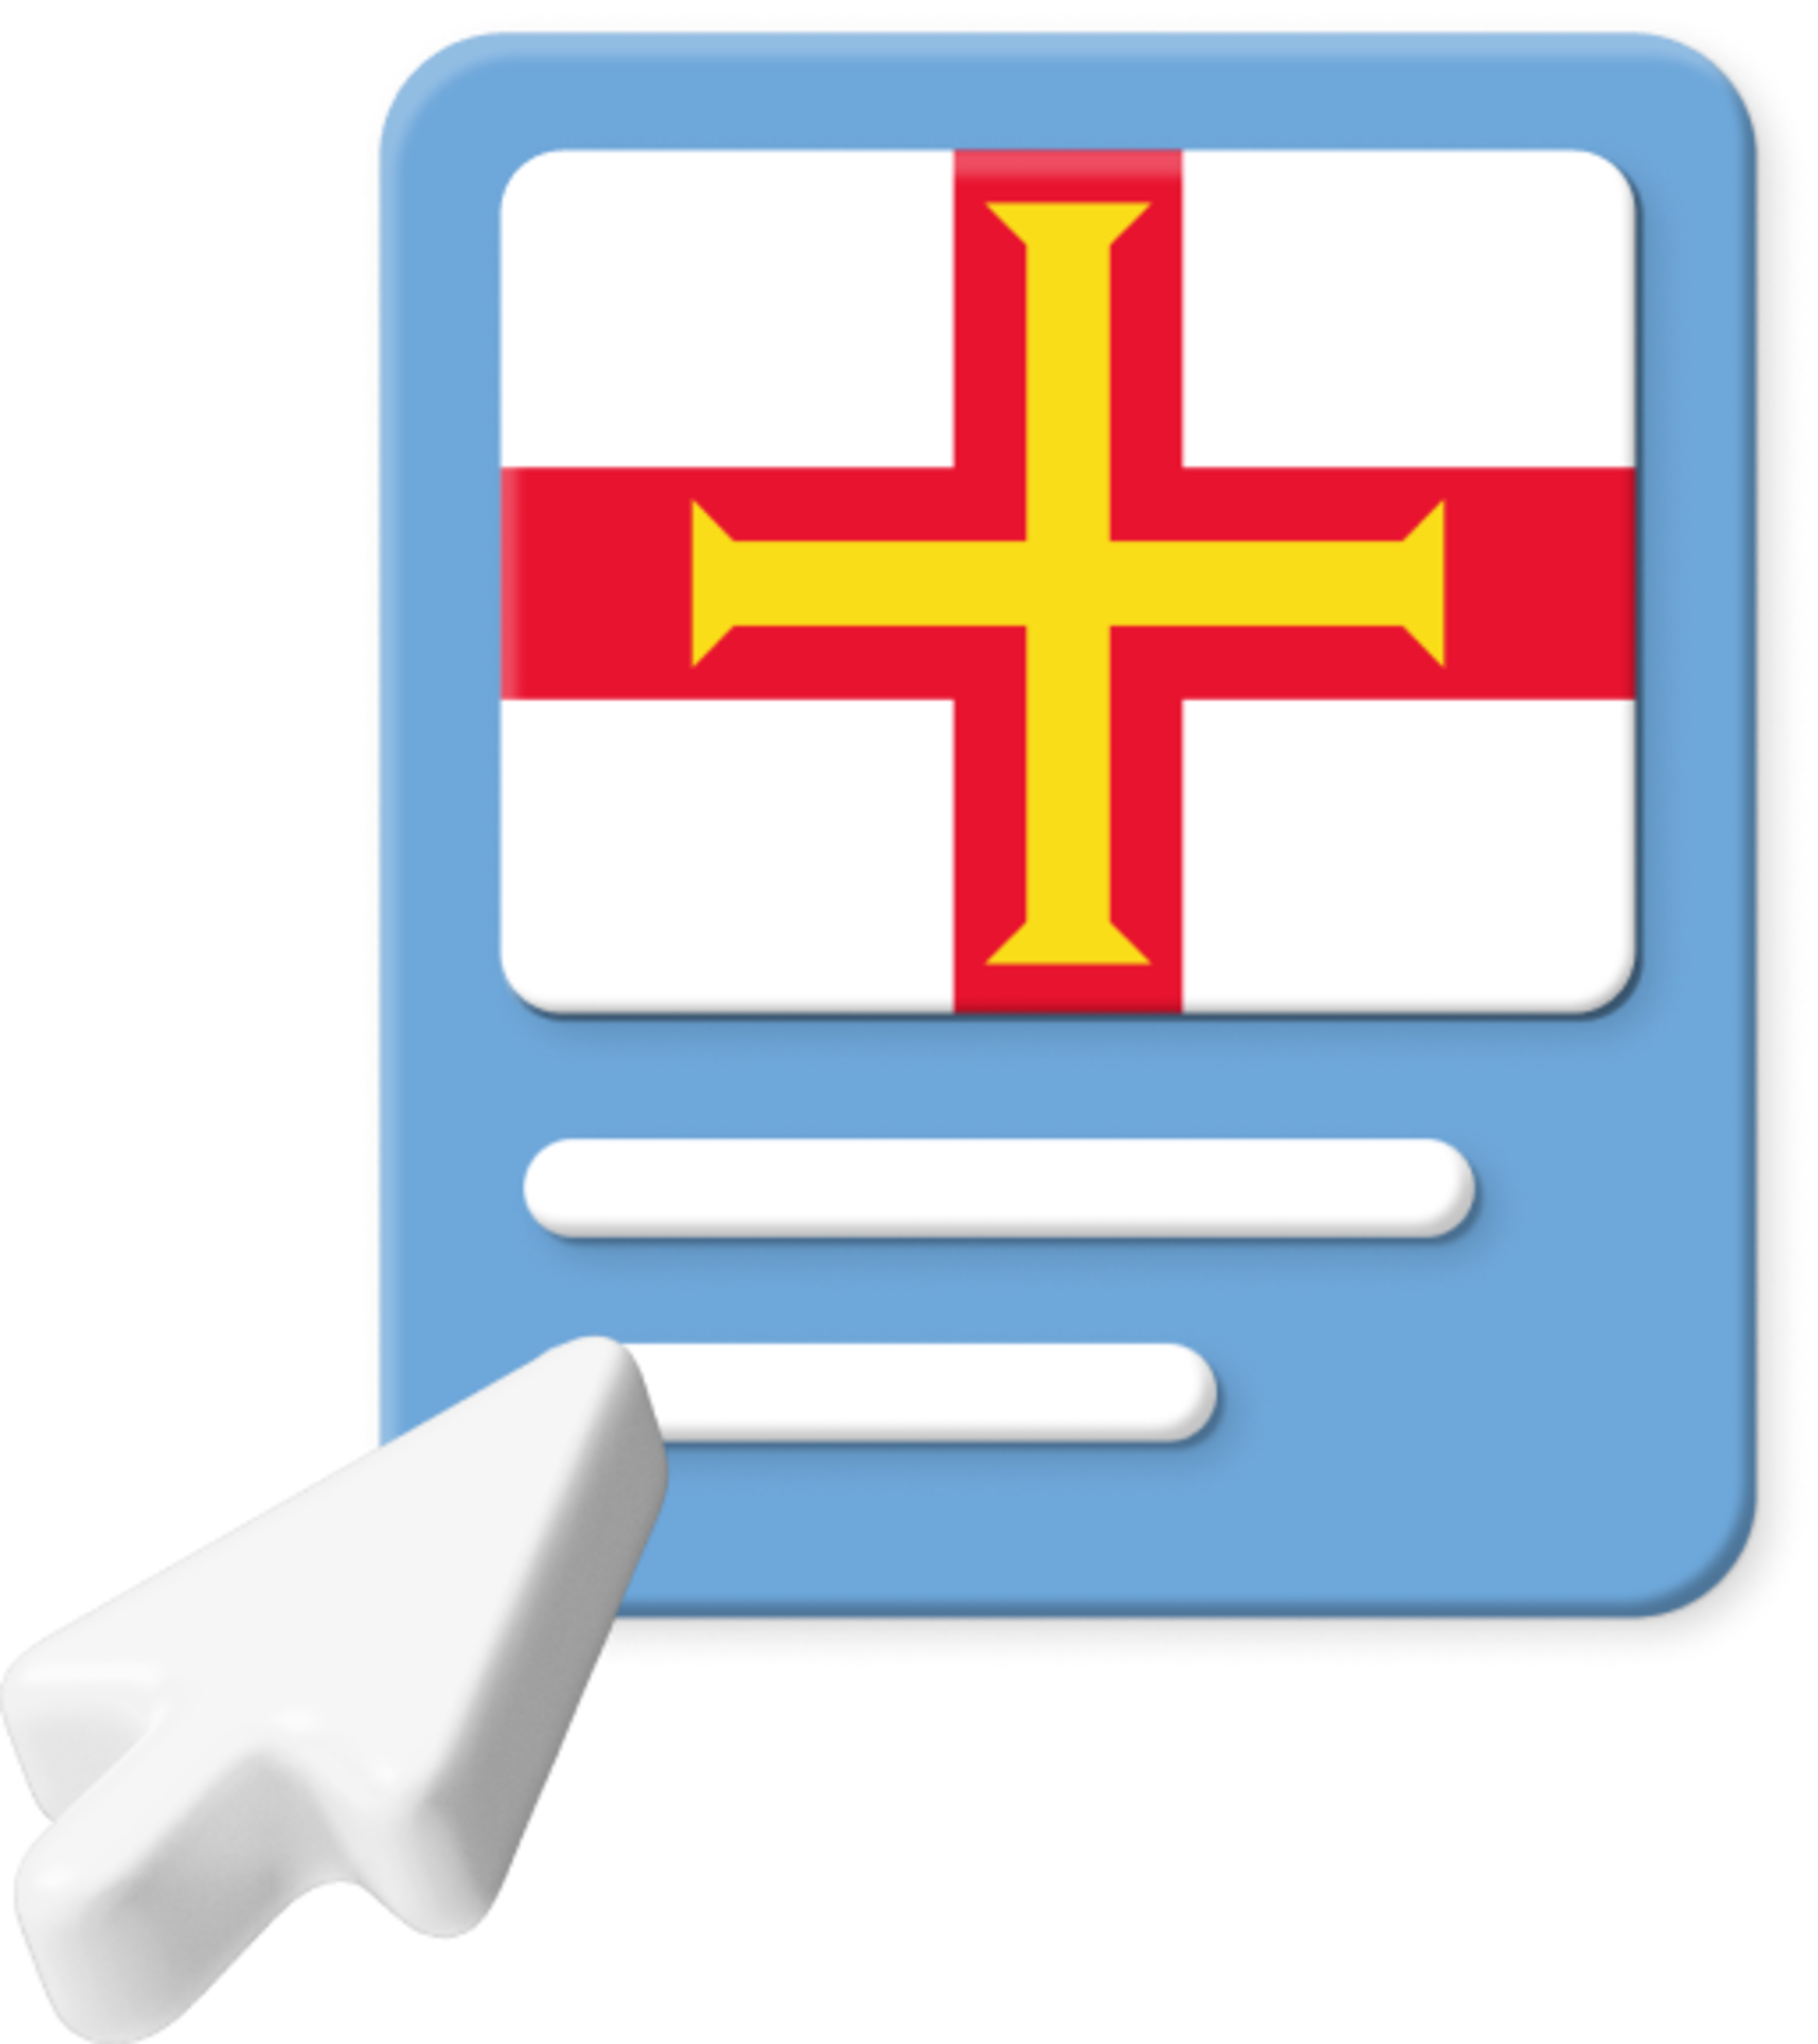 Guernsey flag with large cursor icon